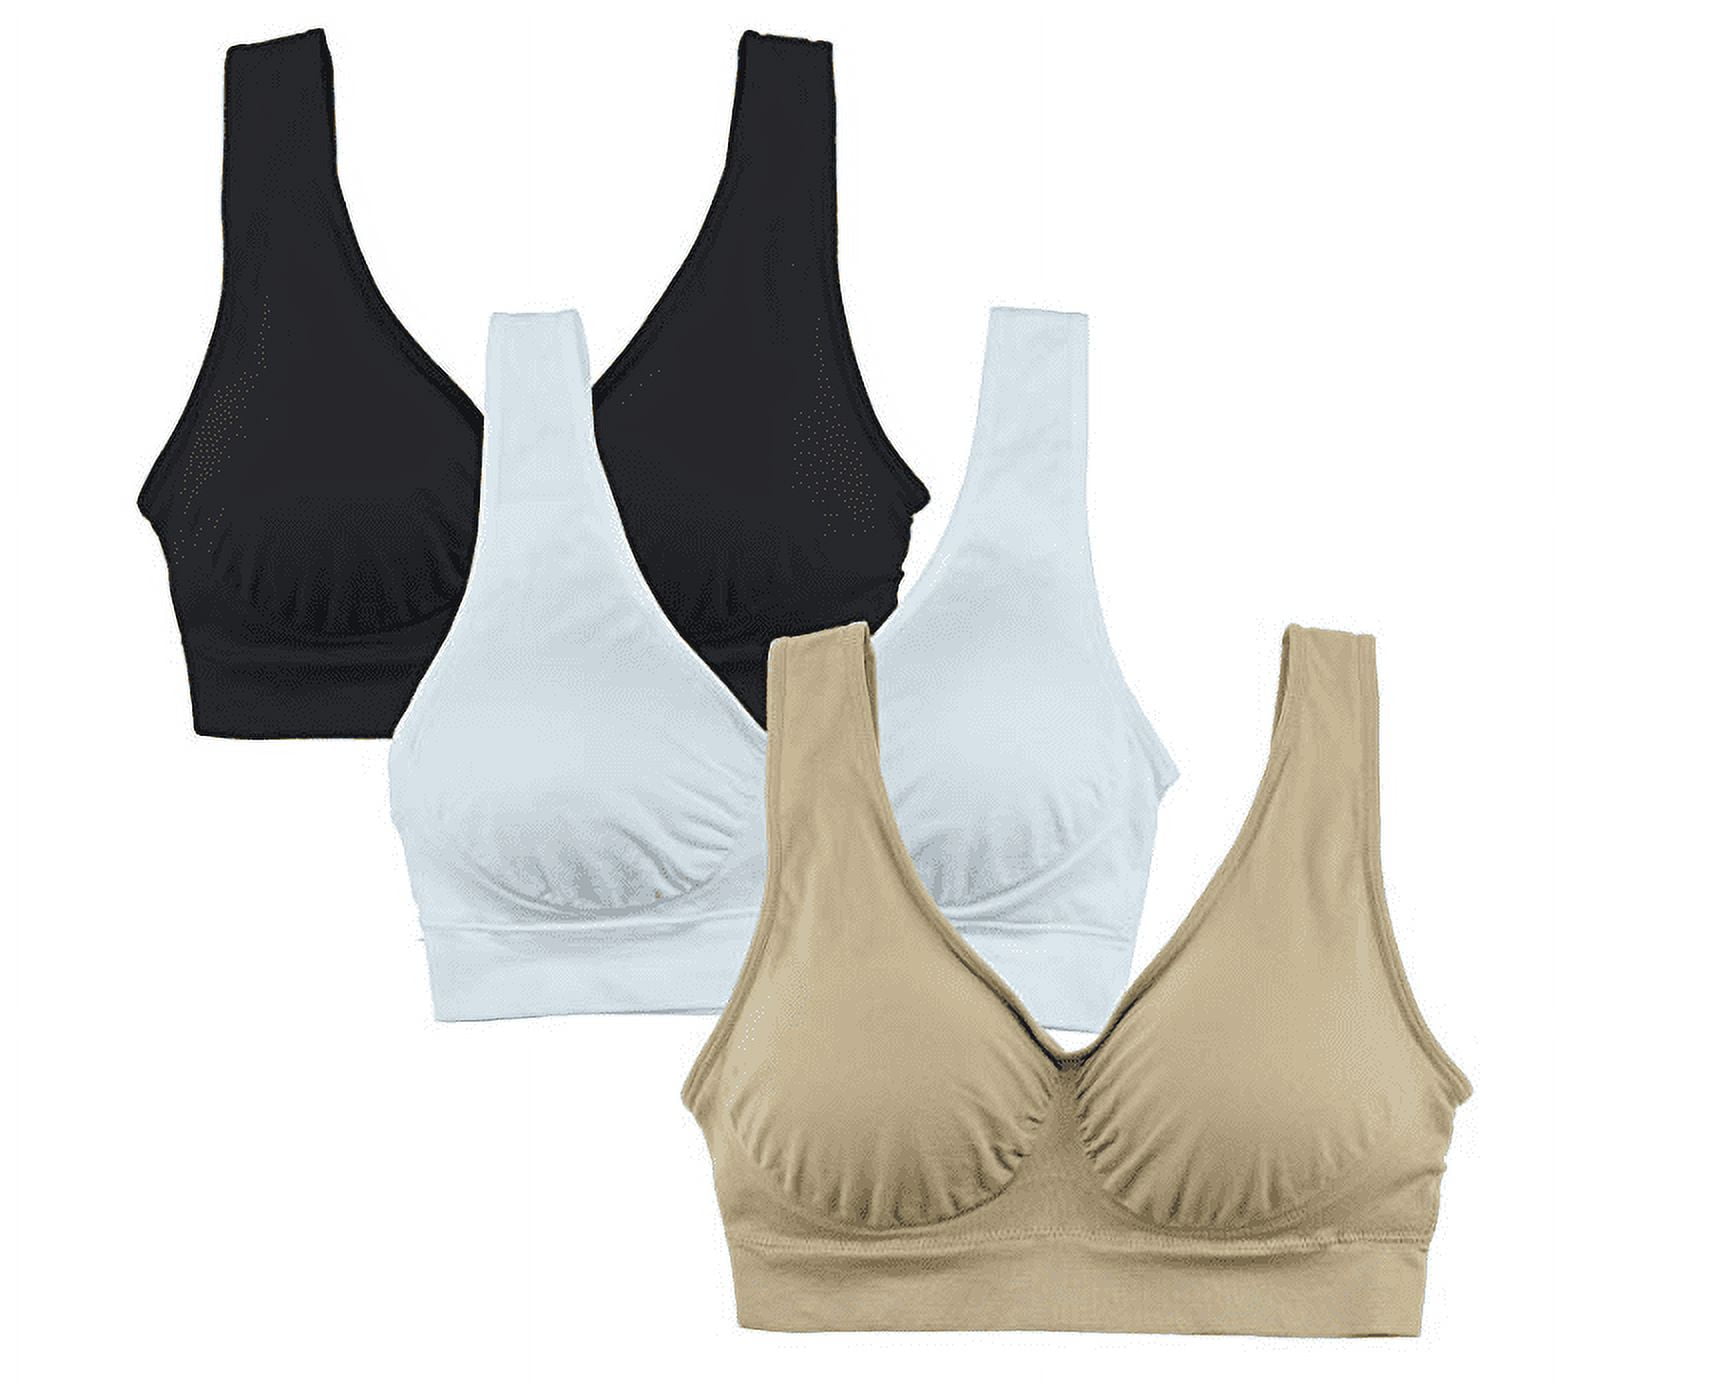 CLZOUD Wide Band Bras for Women White Women's Solid Color Seamless